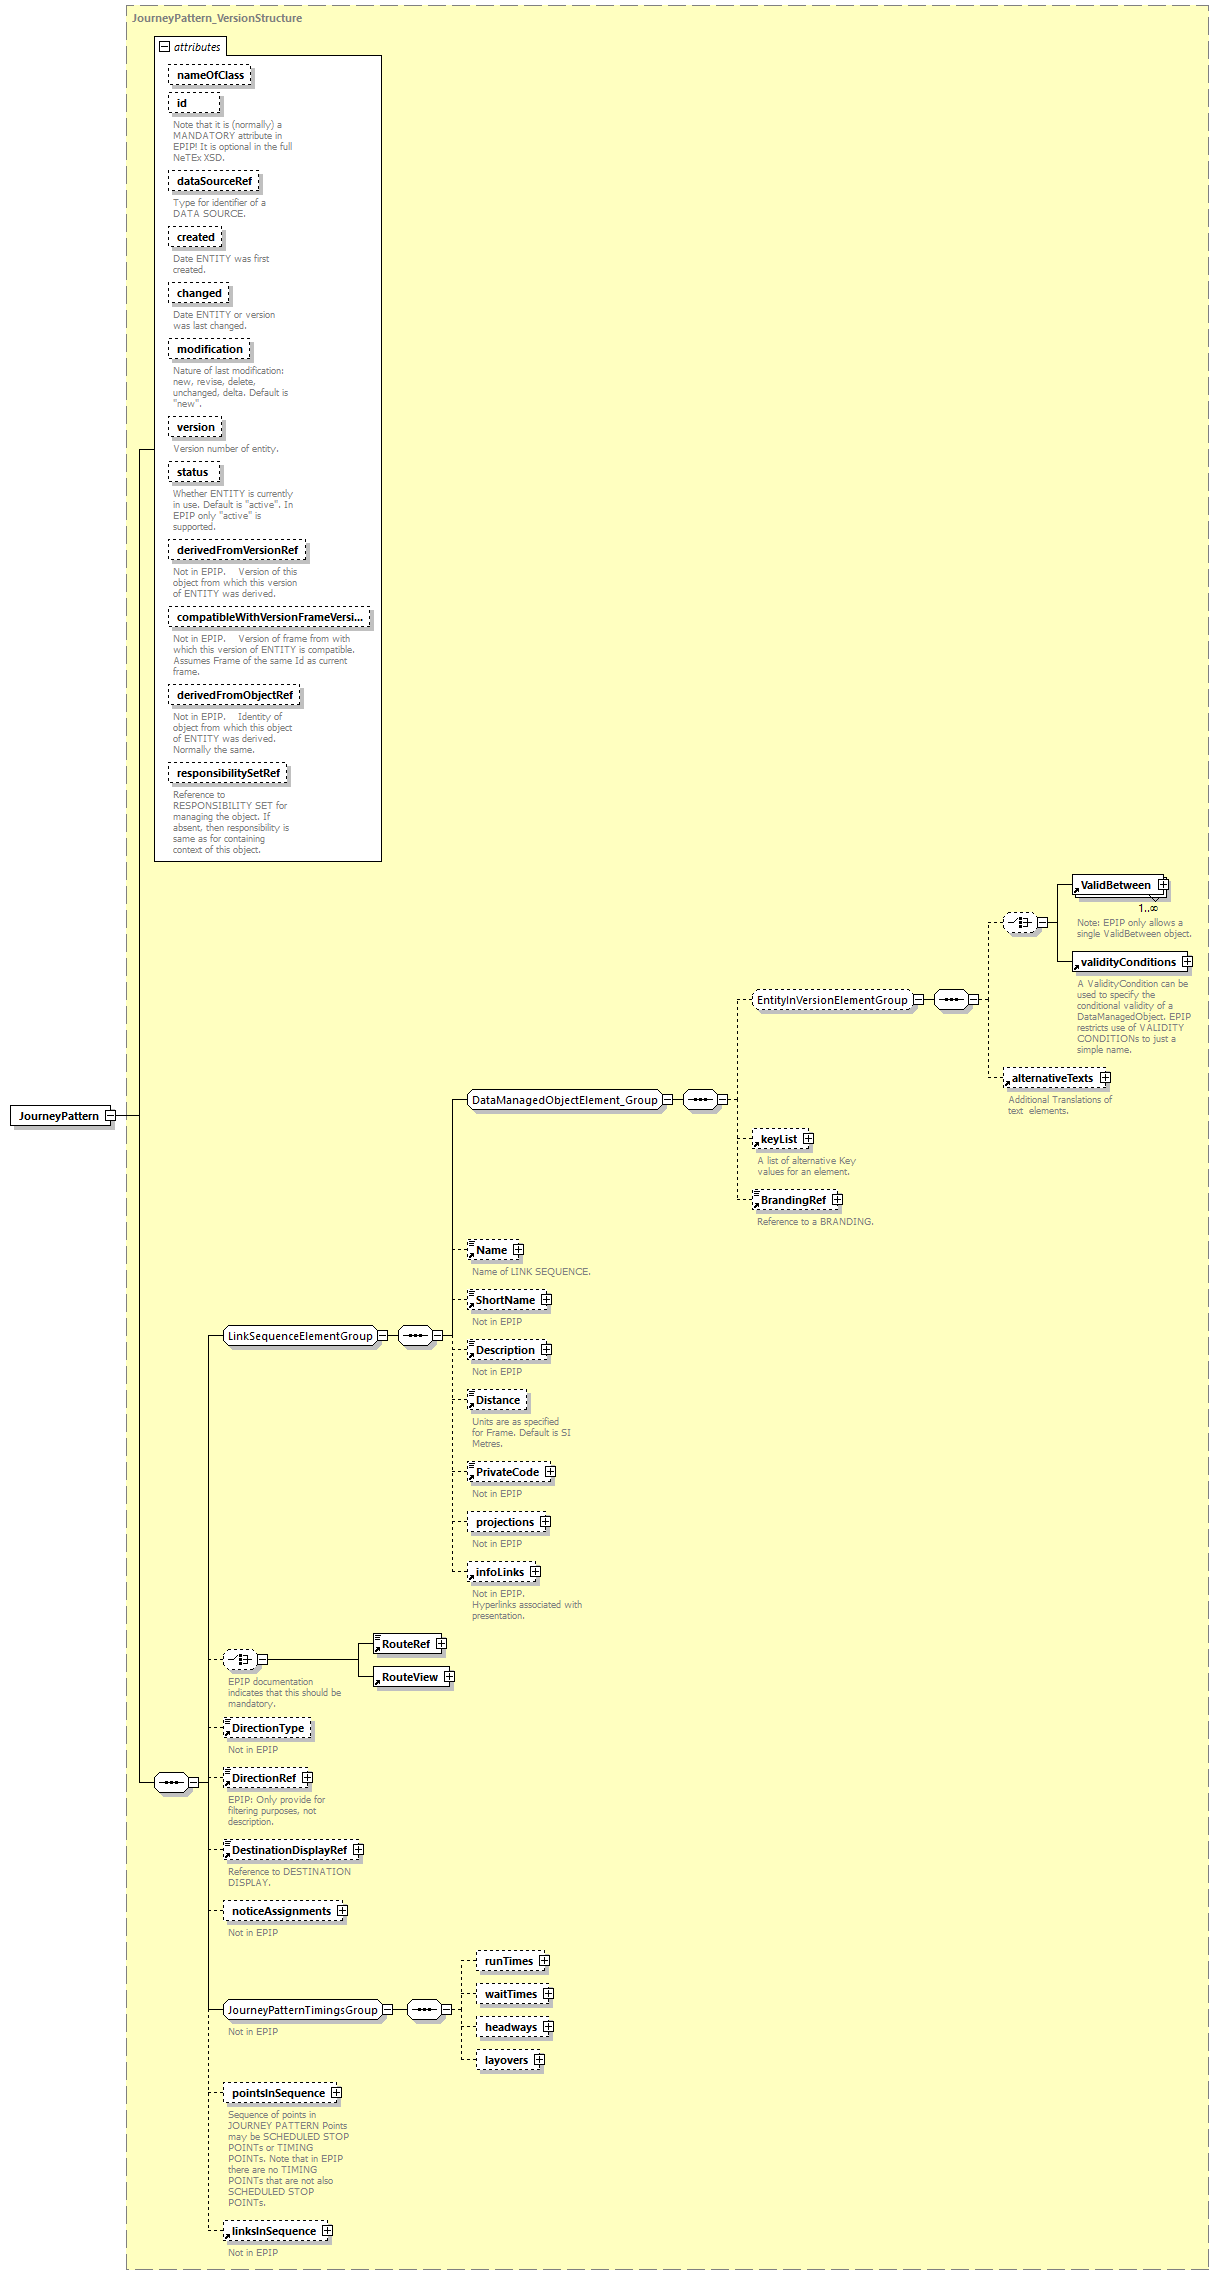 reduced_diagrams/reduced_p215.png